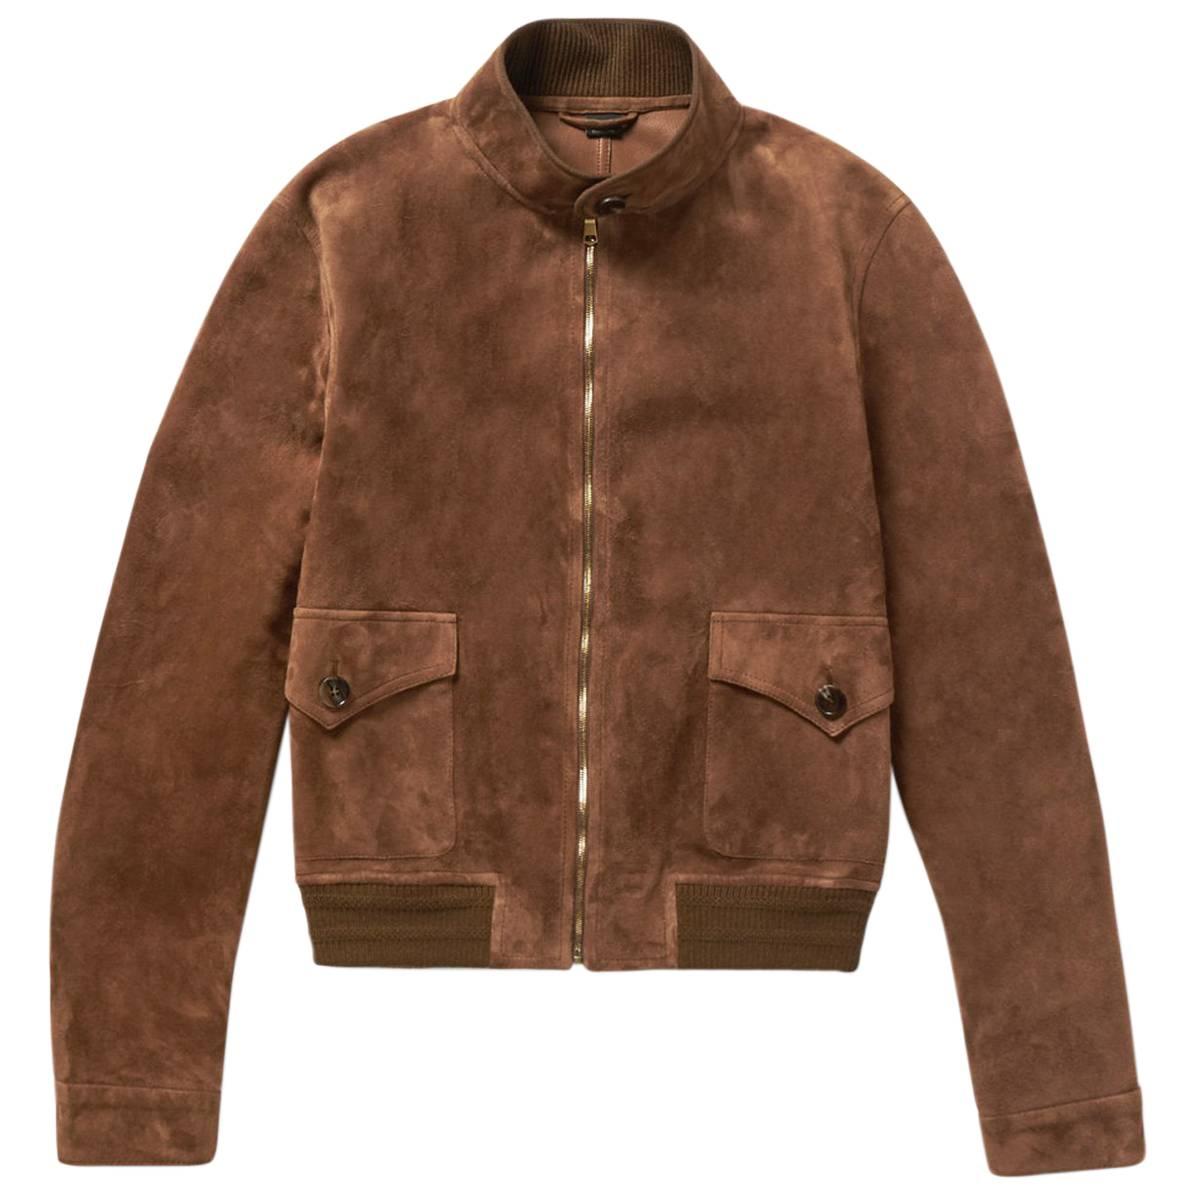 New Gucci Men's Goat Suede Brown Bomber Jacket 54 - US 44 For Sale 